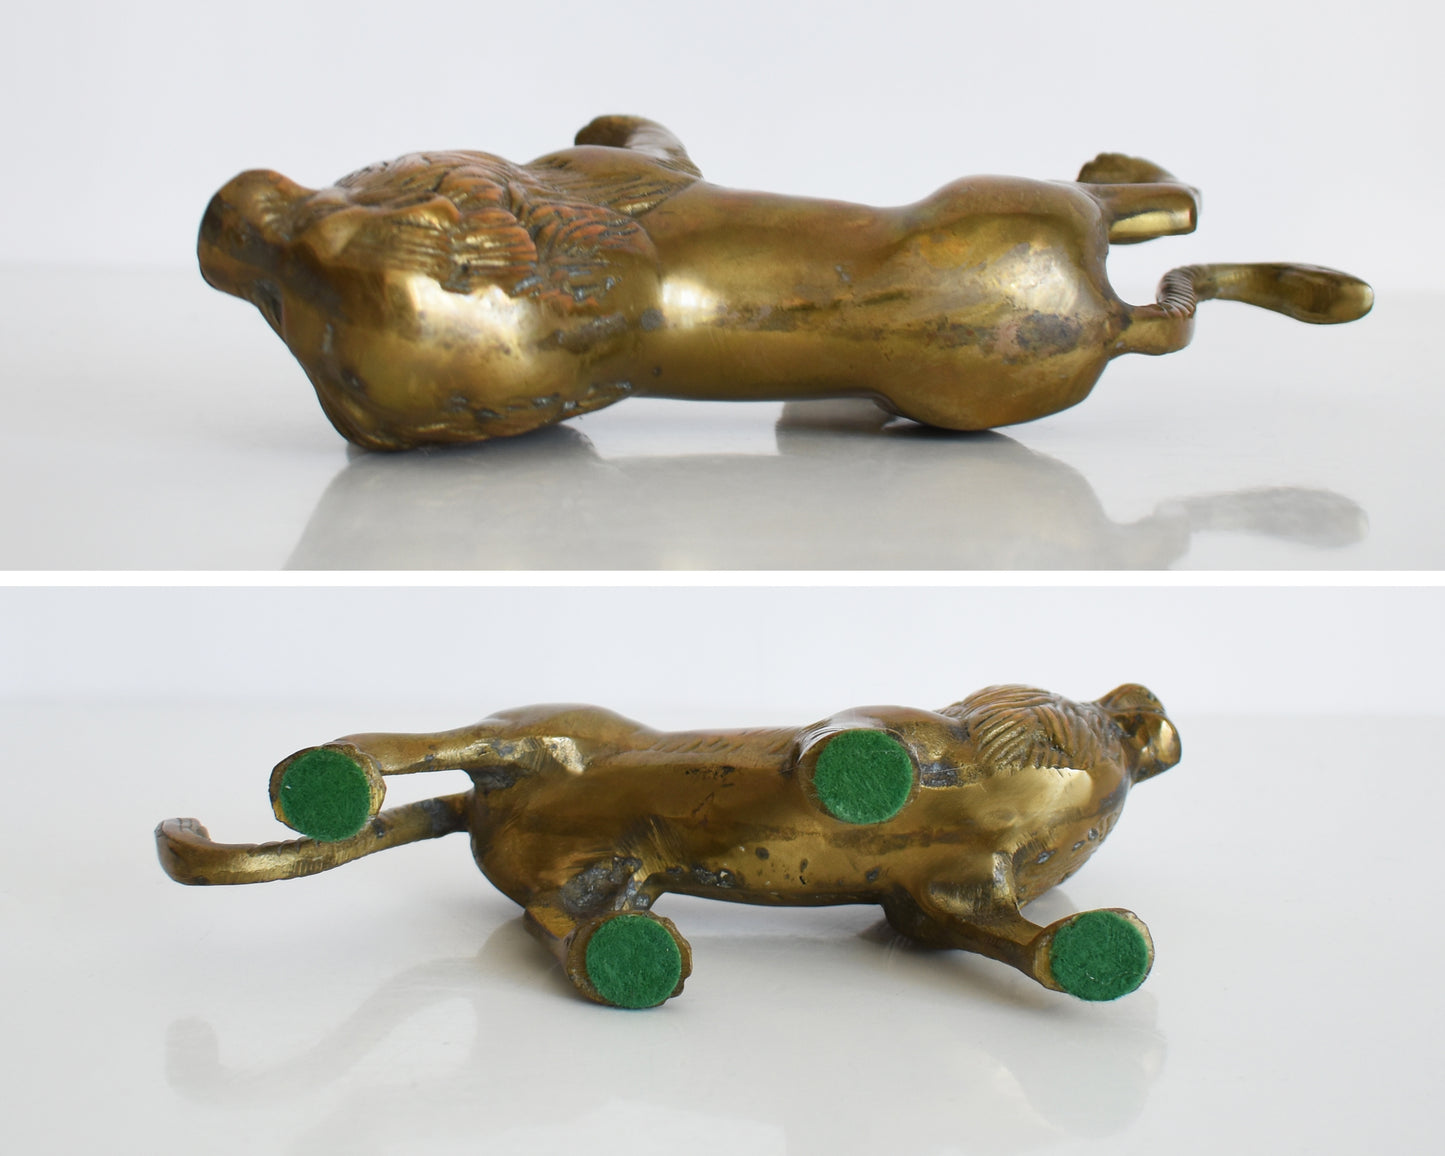 top and bottom view of a brass lion figurine 